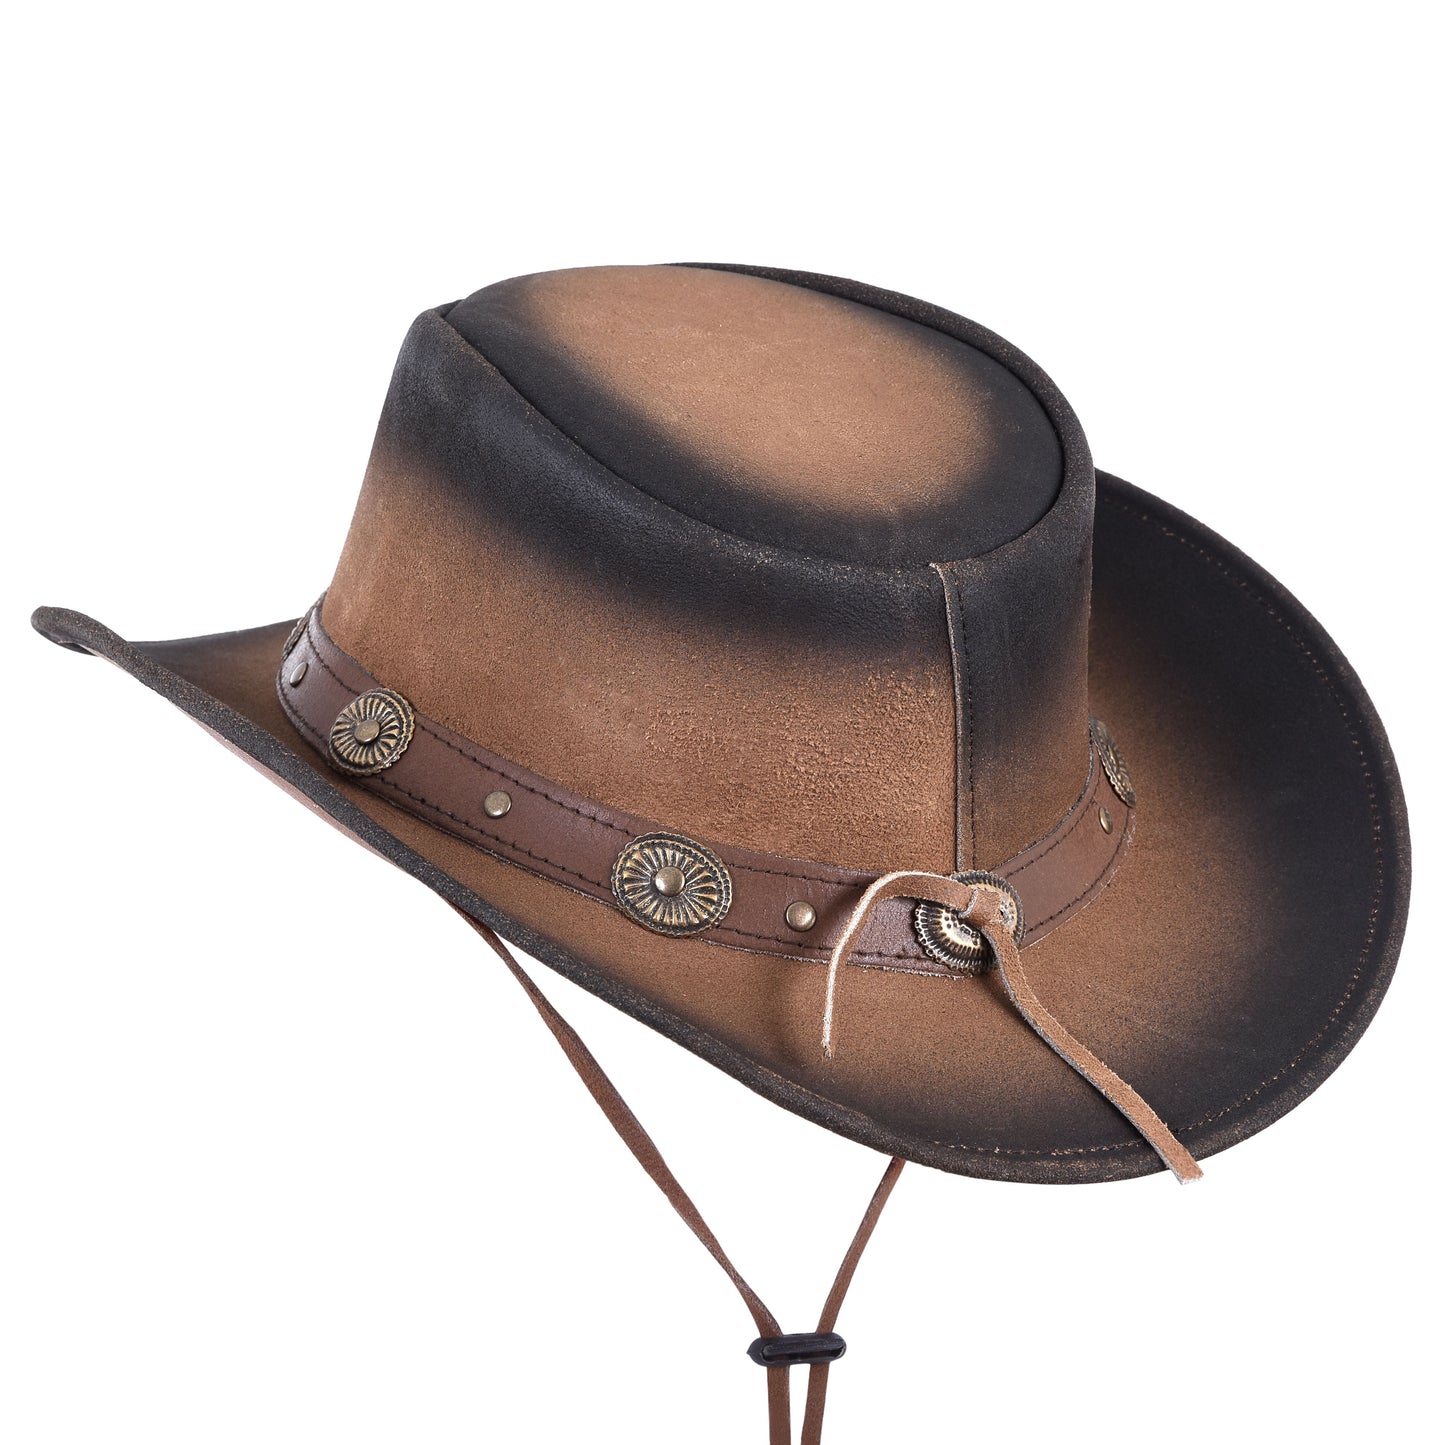 Leather Wester Hat Dual Tone Large Brim Genuine Leather With Buffalo Nickel Band